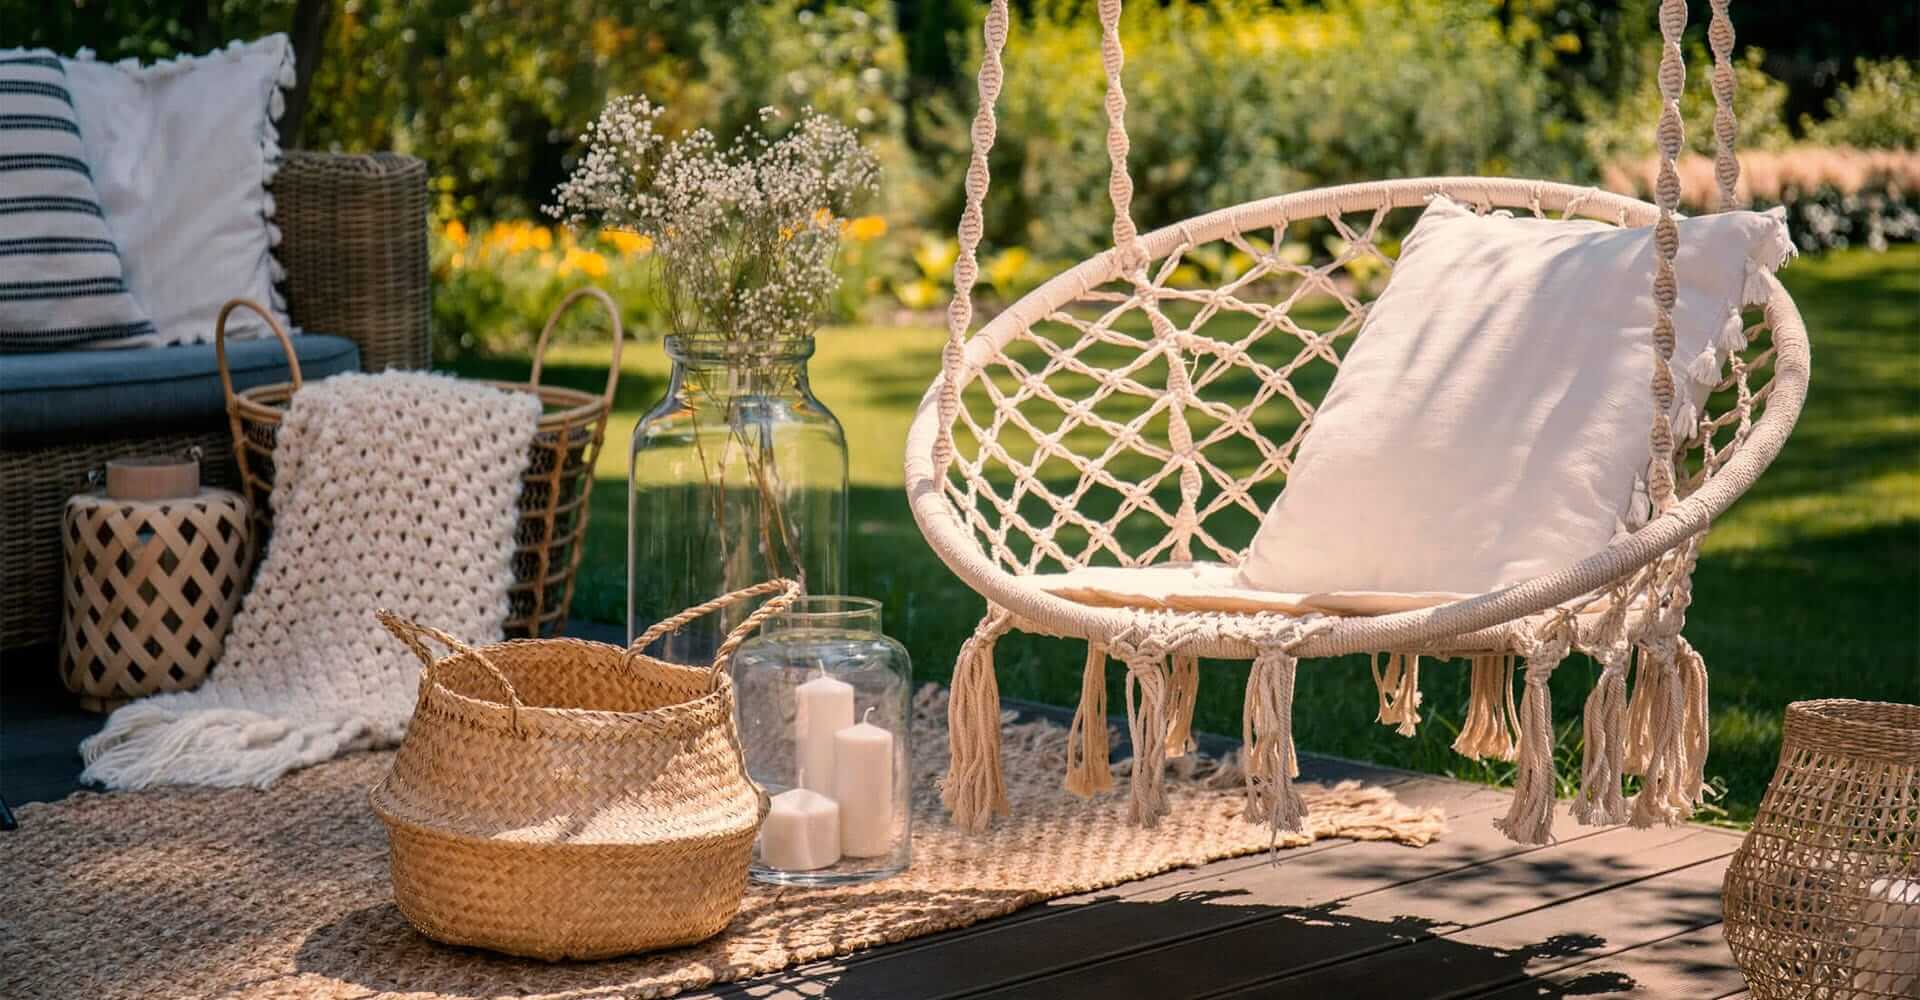 Garden decoration like candles, hanging chair and basket